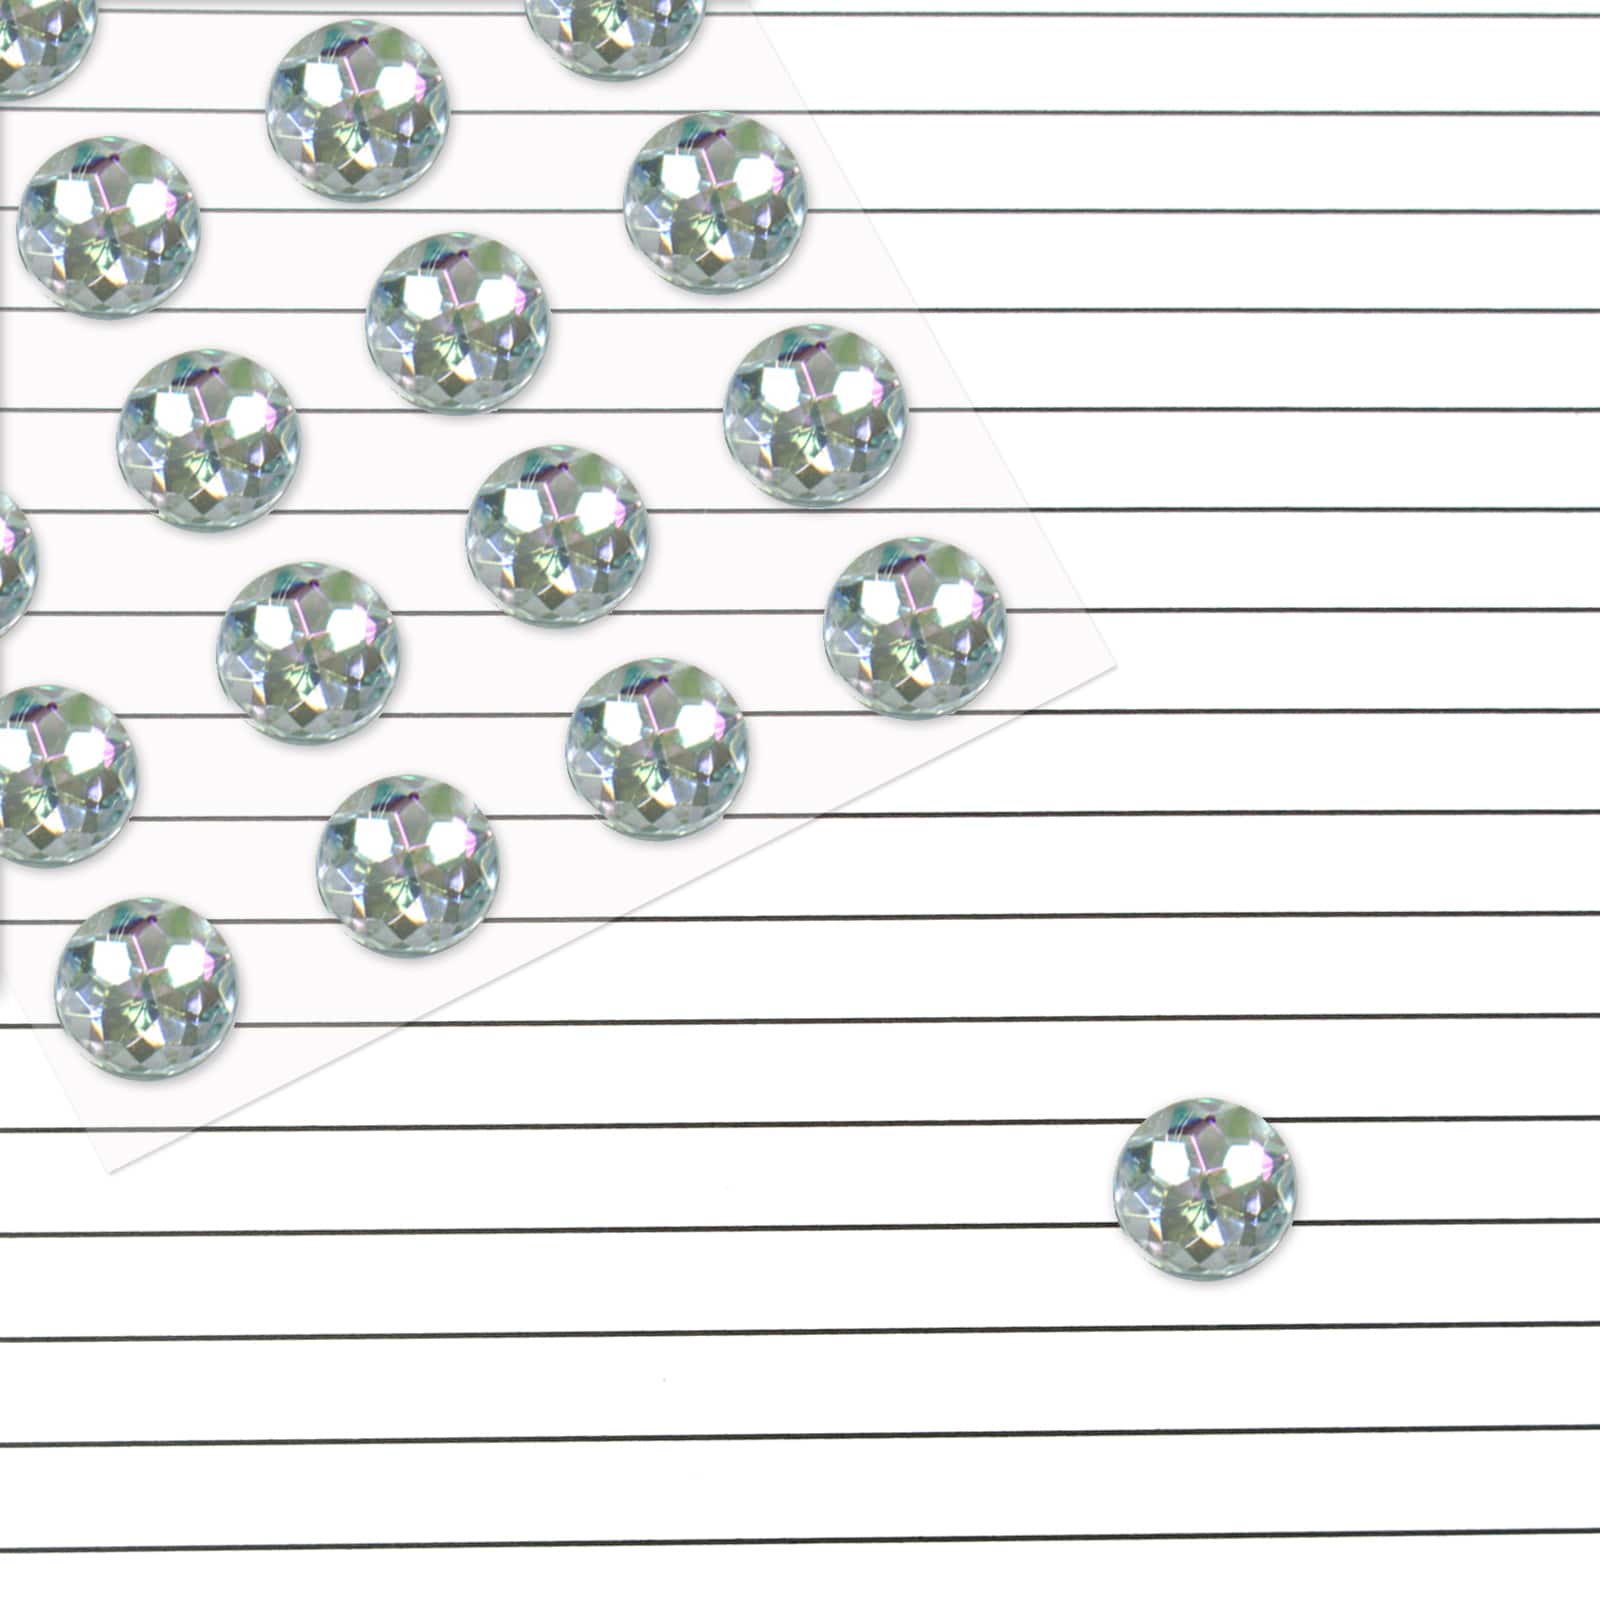 Adhesive Backed Iridescent Rhinestones by Recollections™, Michaels